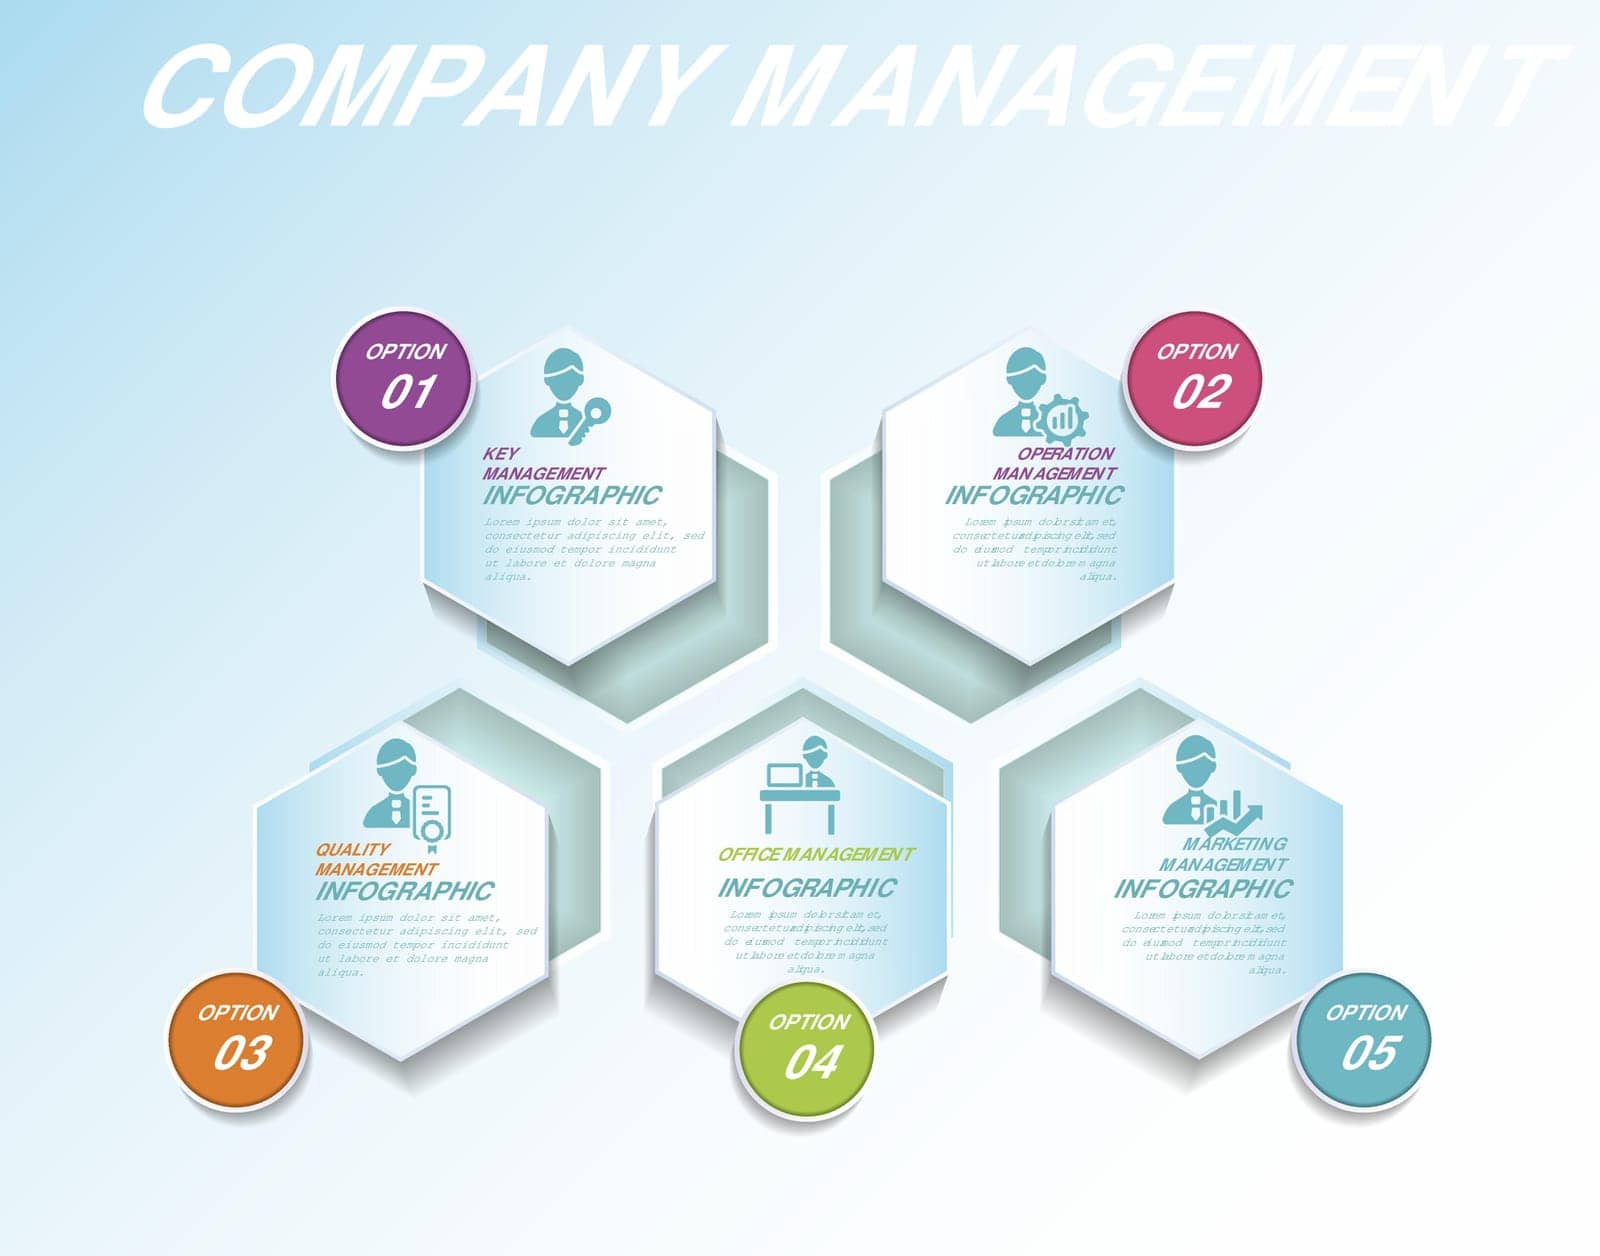 Vector Company Management infographic template. Include Quality Management, Office, Marketing Management, Purchasing Management and others. Icons in different colors.